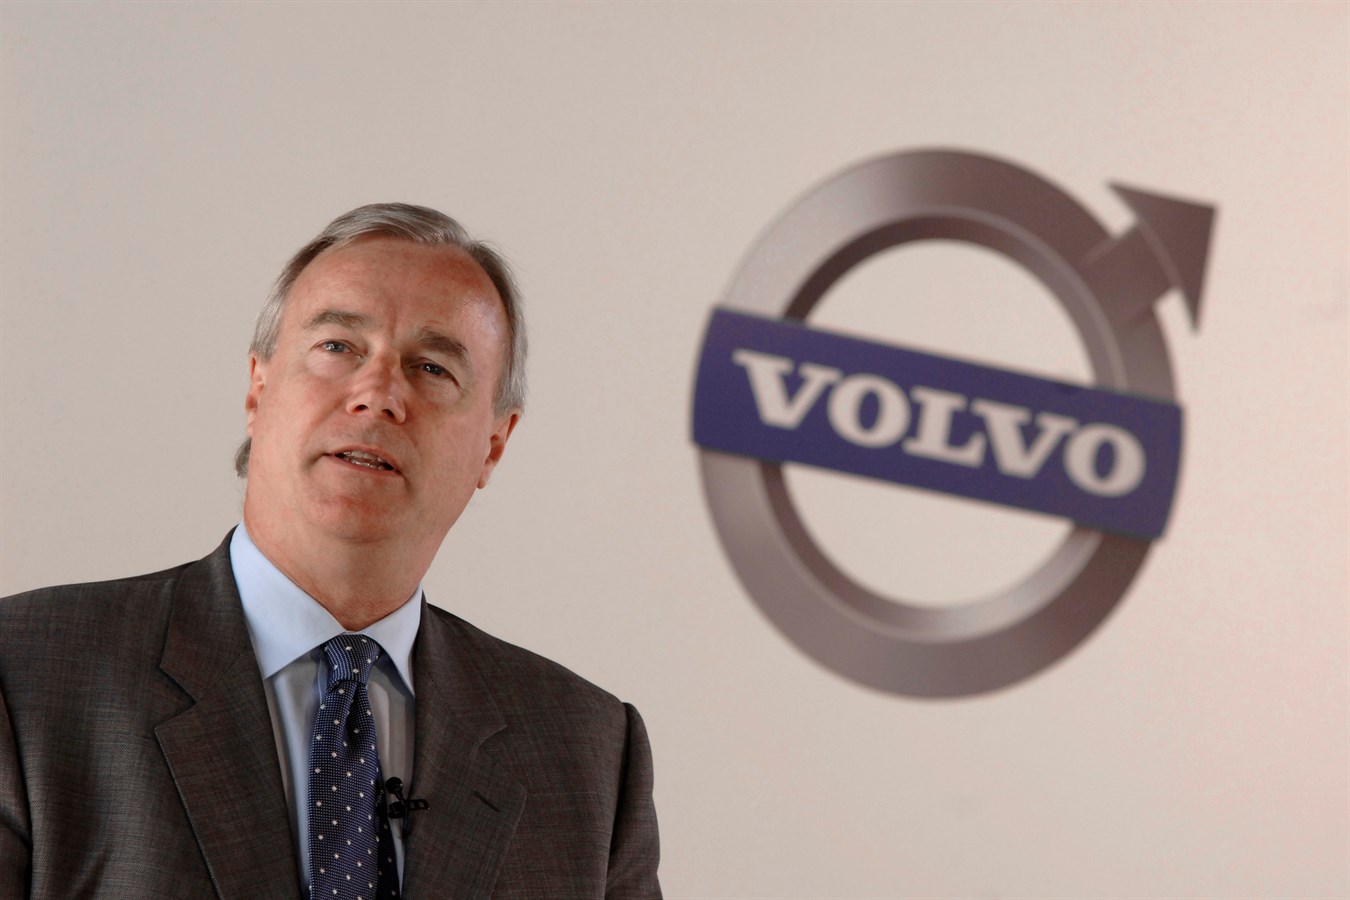 Fredrik Arp was CEO and President, Volvo Car Corporation from 1 Oct 2005-30 Sept 2008.